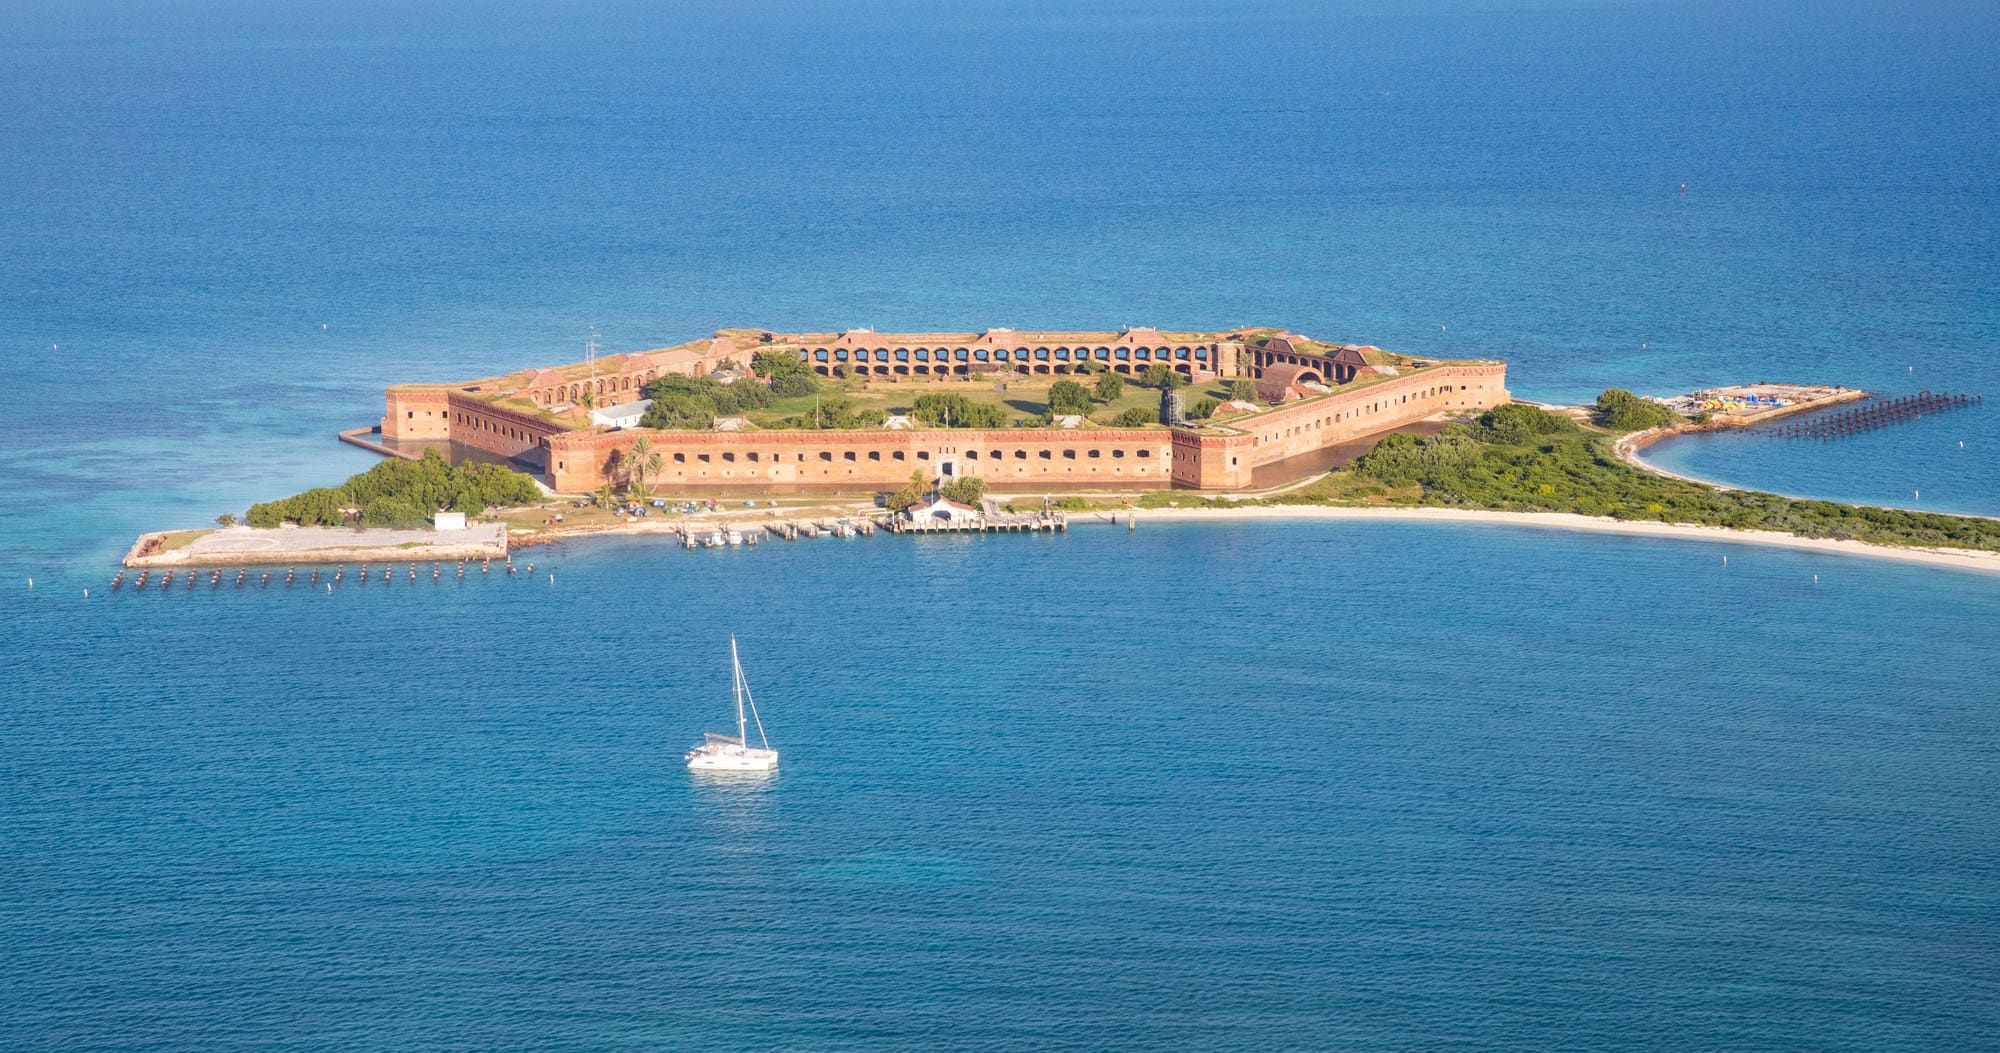 Featured image for “How to Get to Dry Tortugas National Park: Ferry, Seaplane & Private Charter”